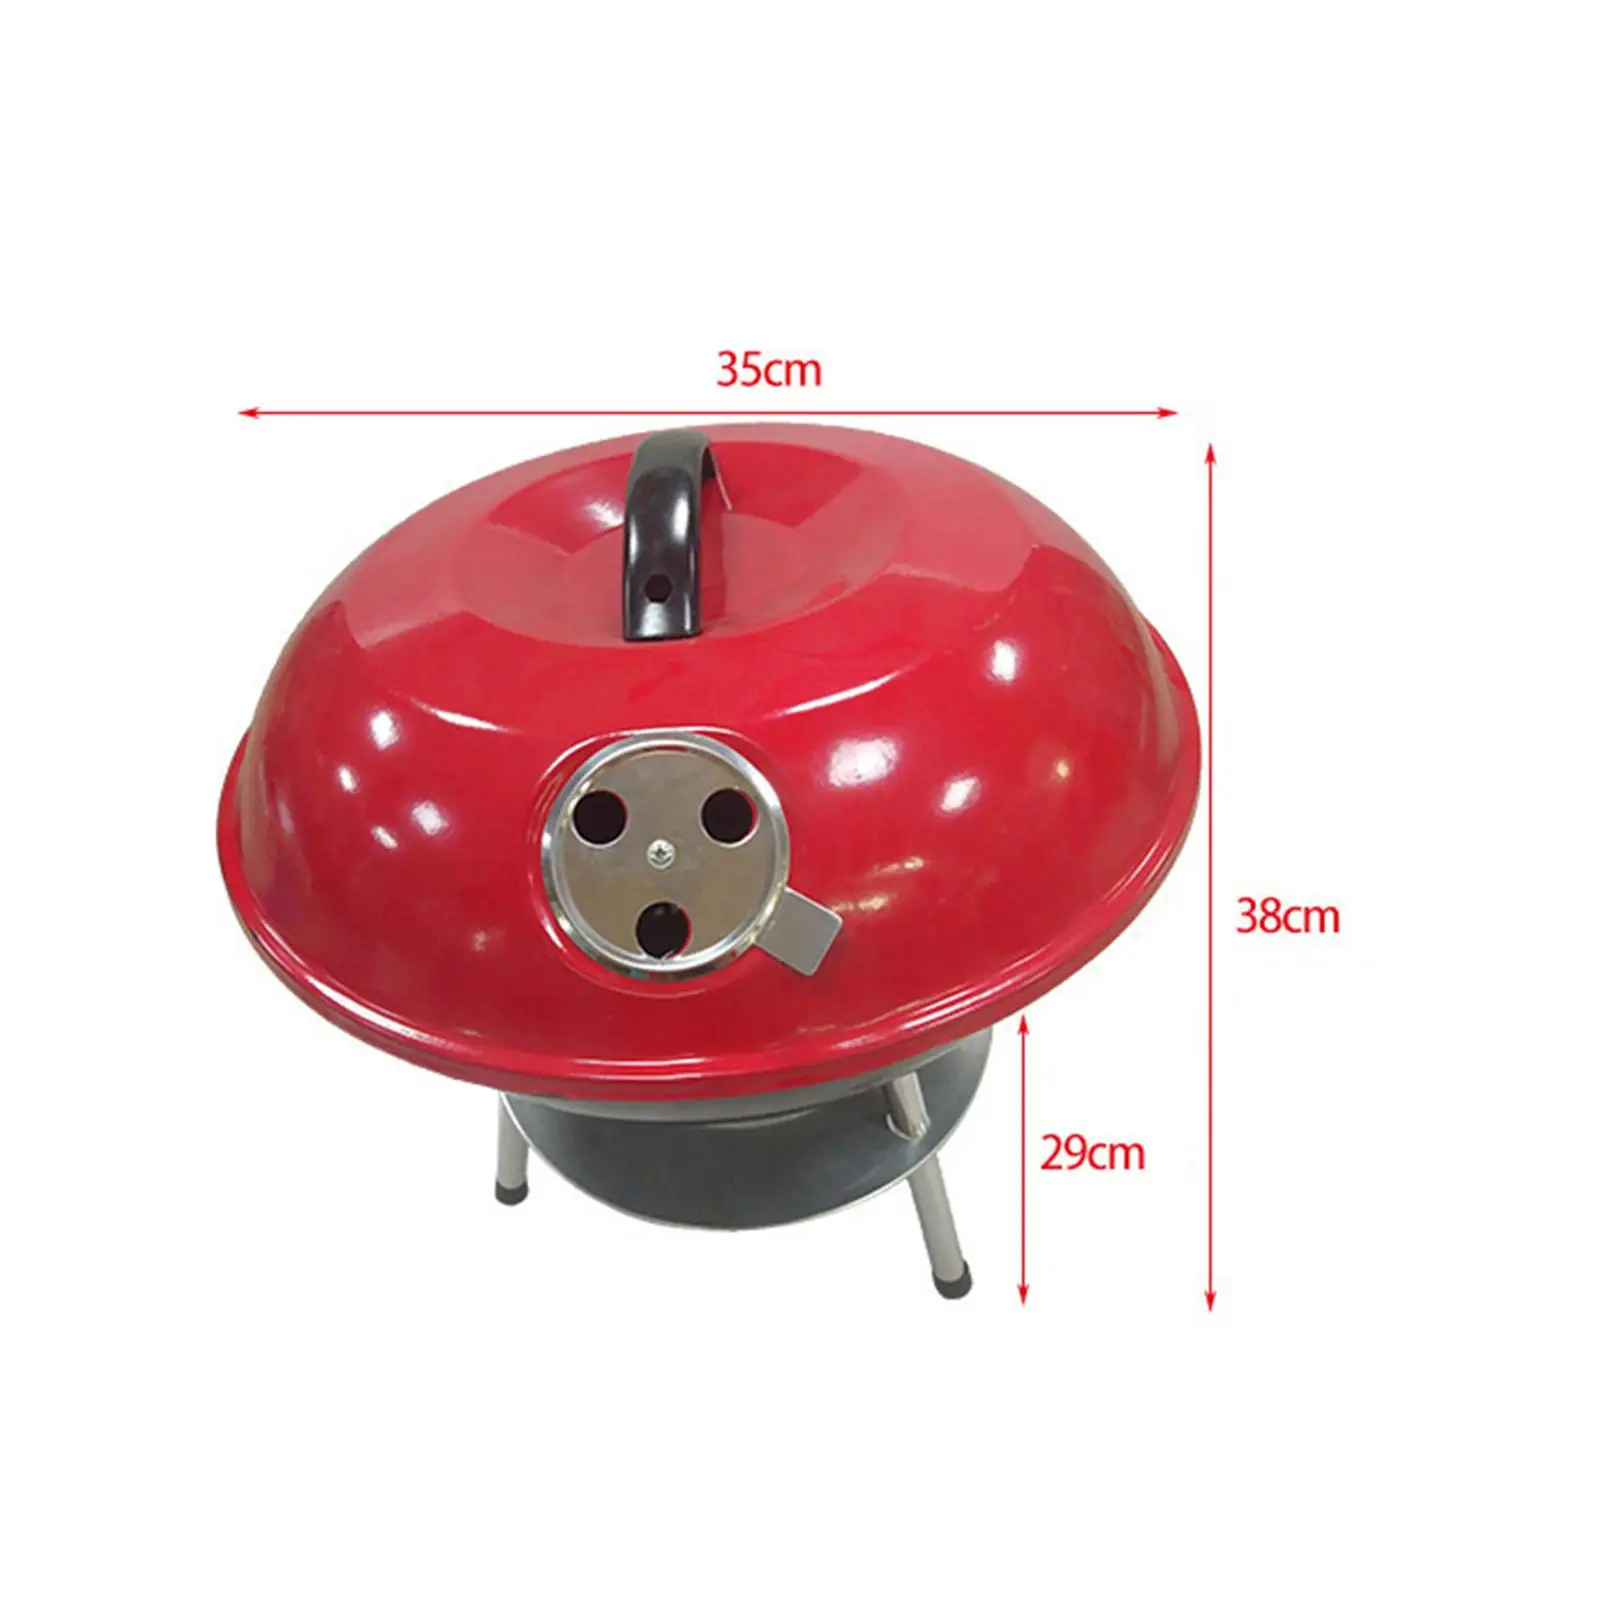 BBQ Charcoal Grill Party Cooking Tools Portable Griller Barbecue Grill Stove for Party Outdoor Grilling Patio Cooking Camping